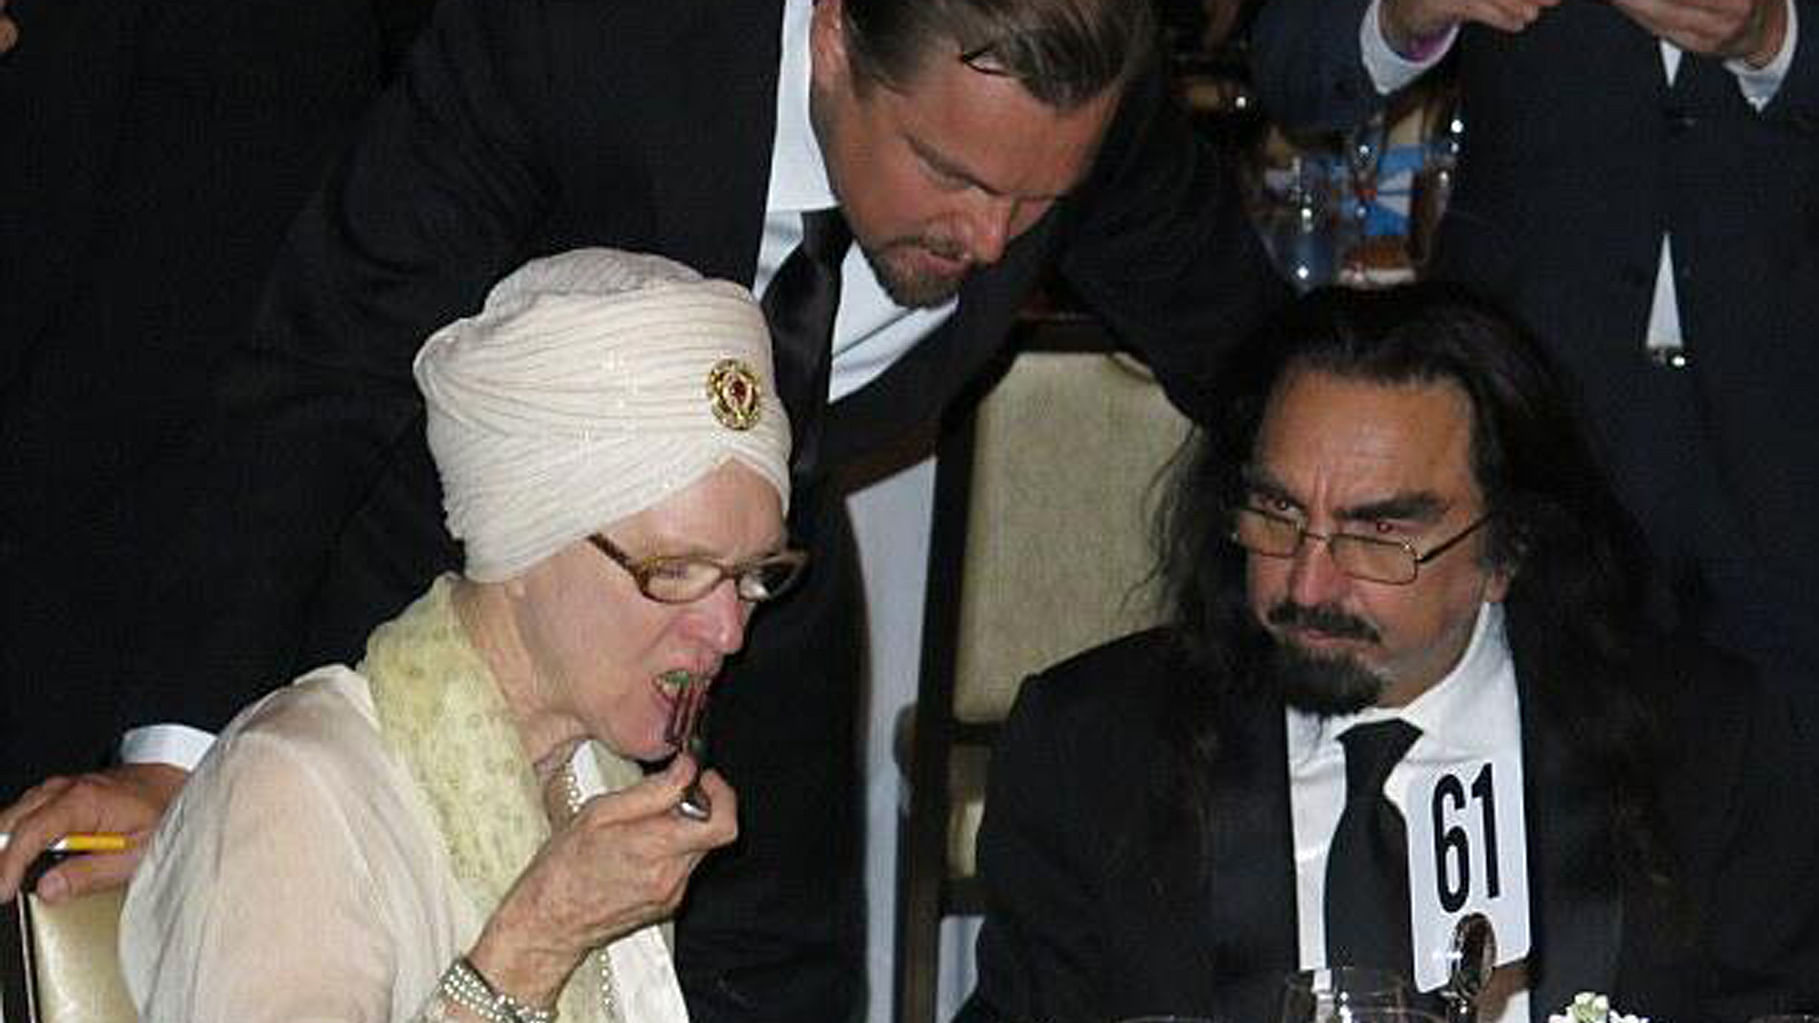 Hollywood superstar Leonardo DiCaprio (C) with his father George (R) and his stepmother Peggy (L) during an award ceremony. (Photo: Twitter/<a href="https://twitter.com/ishwinder06/status/447390413876236288">@ishwinder06</a>)